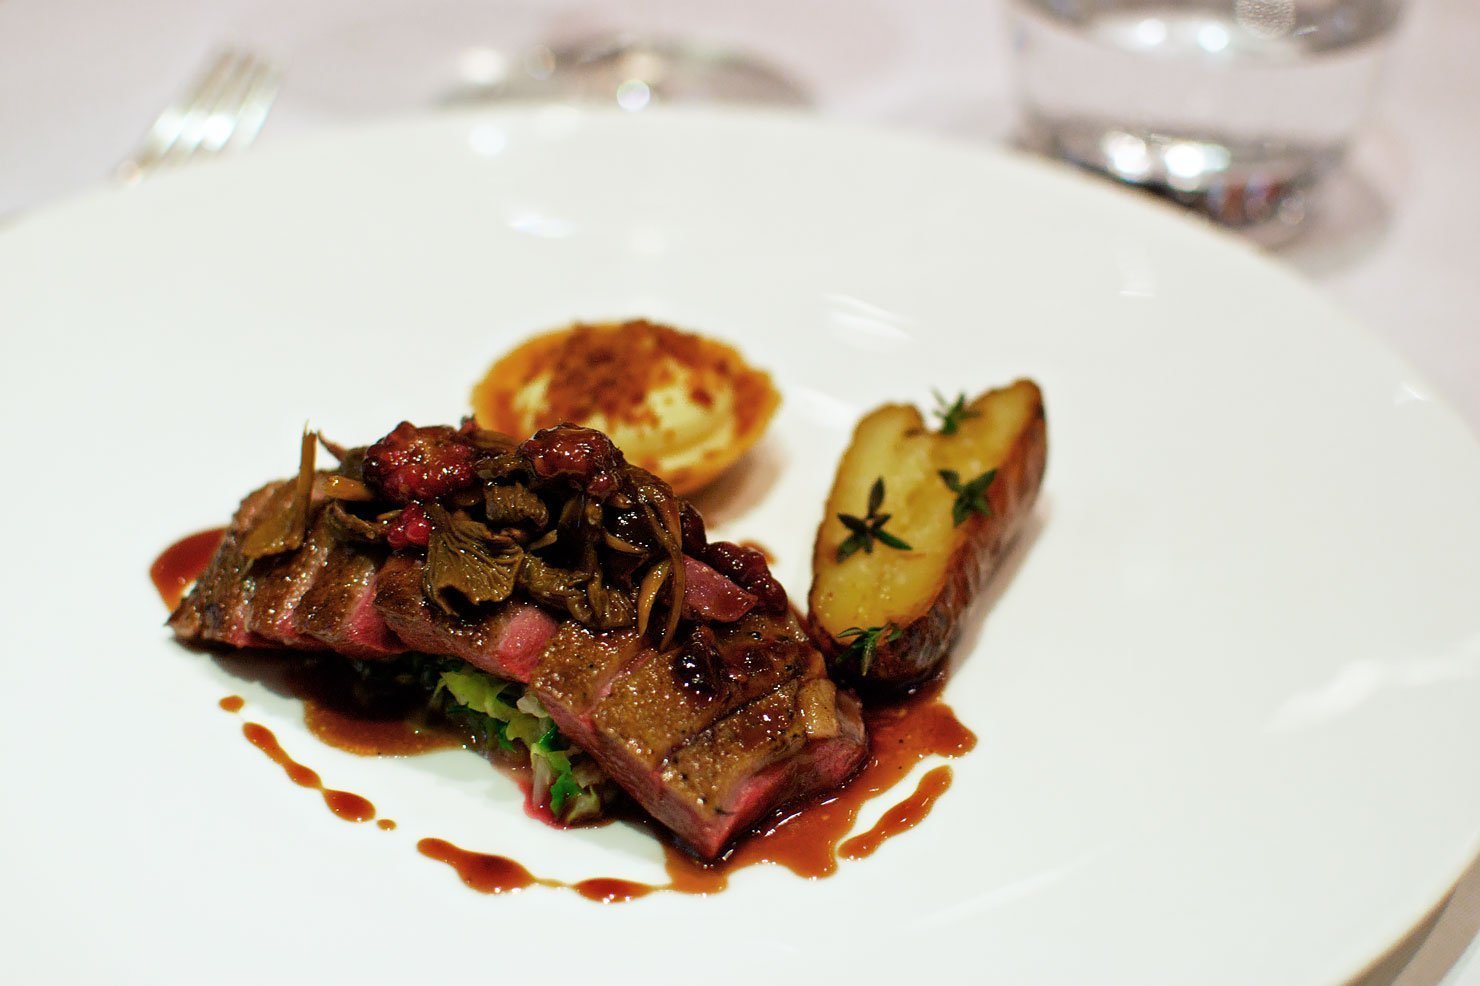 Review of a TRULY luxurious gift experience at The Square Restaurant in London. Main: Roast breast of mallard.